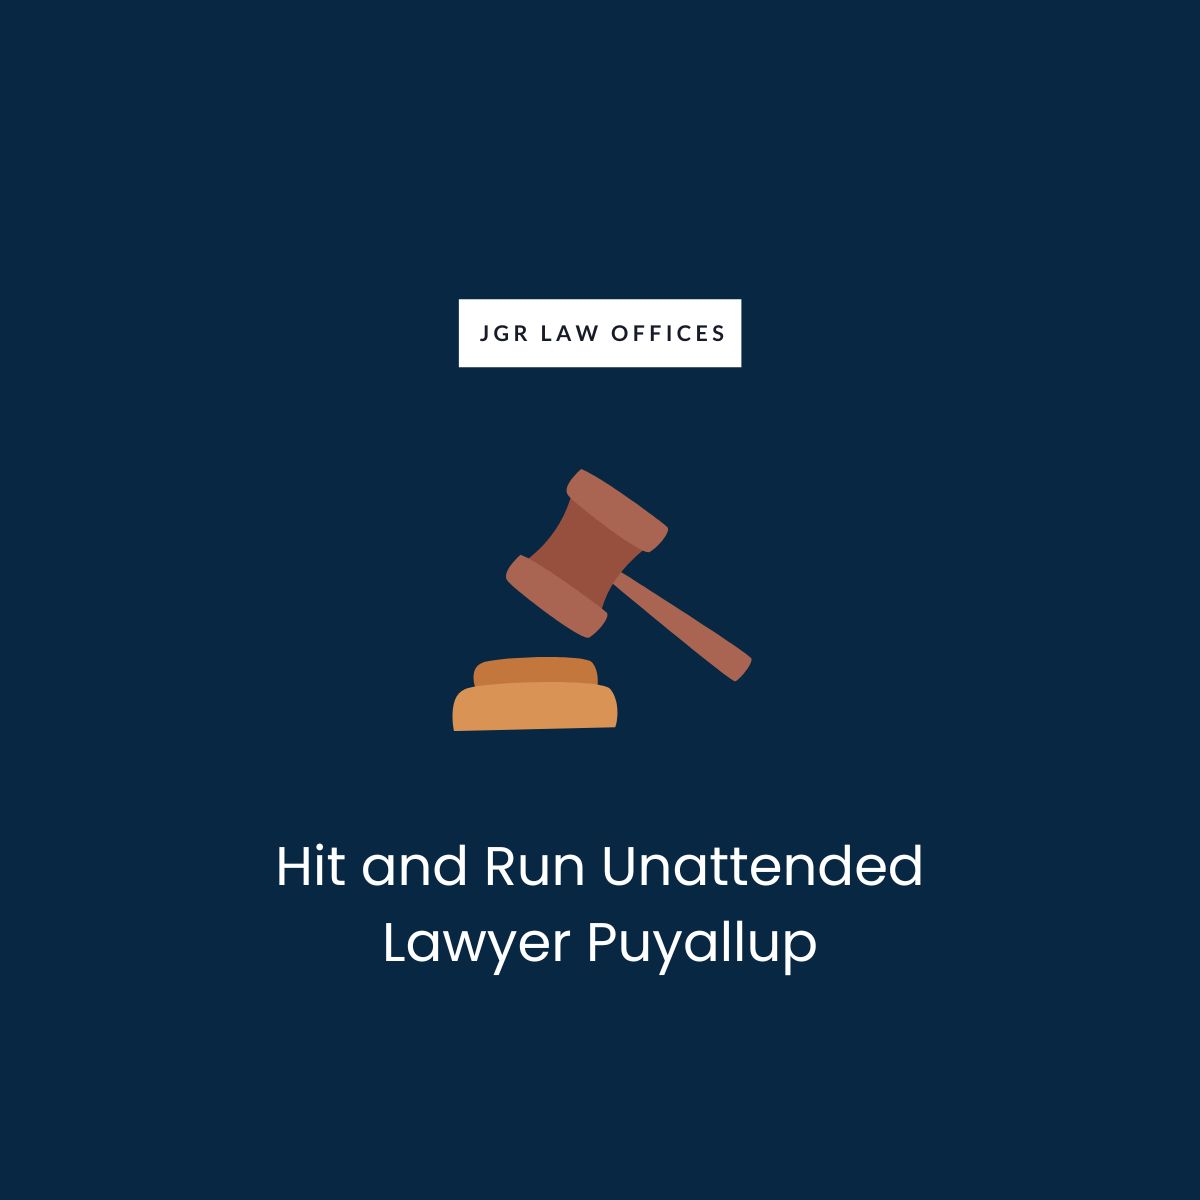 Hit and Run Unattended Attorney Puyallup